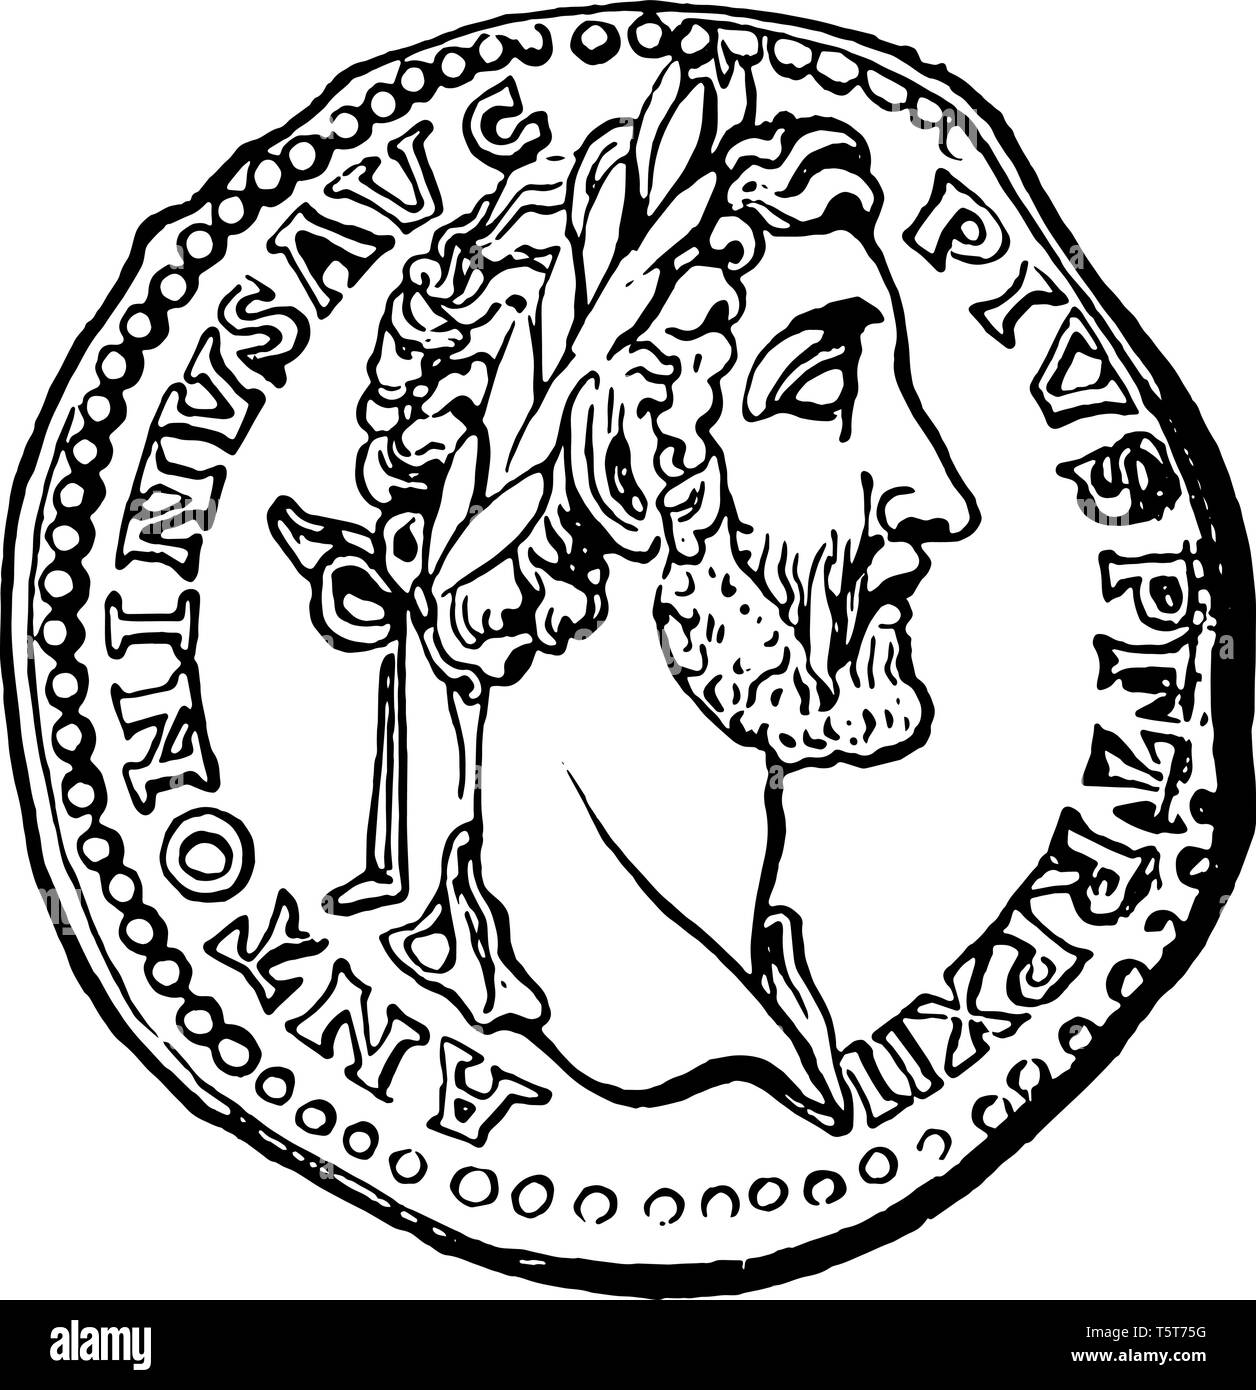 An ancient coin that has the design of a Roman emperor, vintage line drawing or engraving illustration. Stock Vector